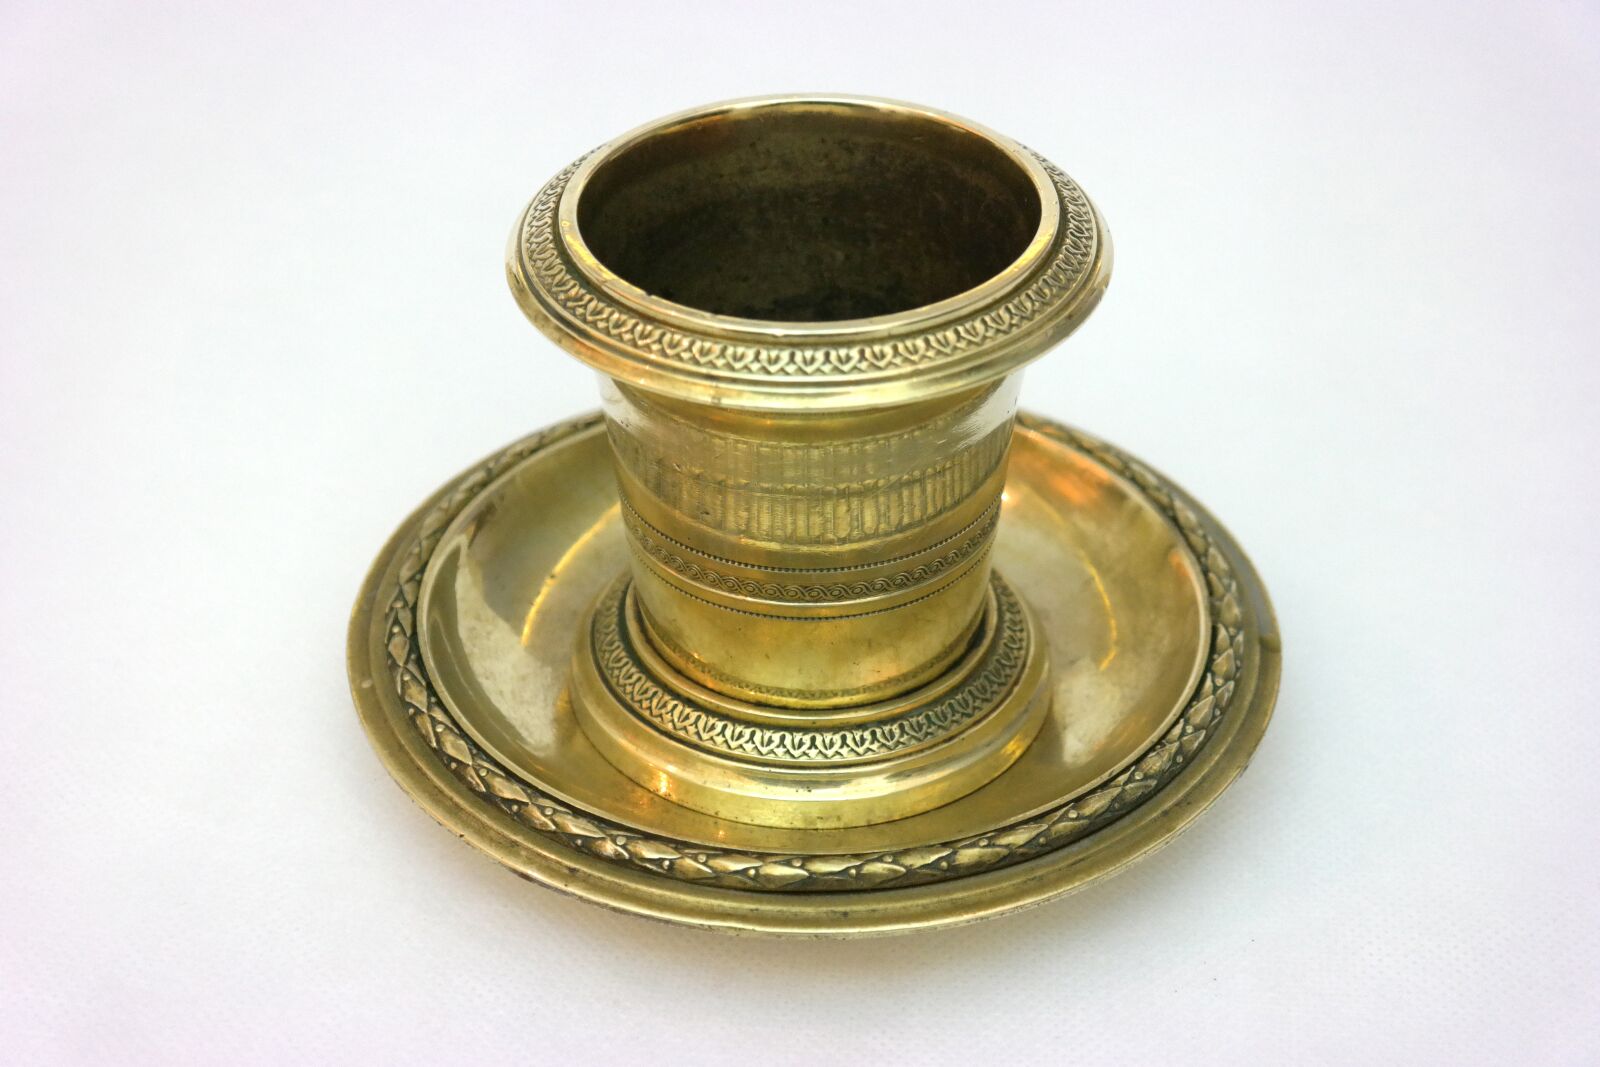 Samsung NX300 sample photo. Inkwell, antique, bronze photography